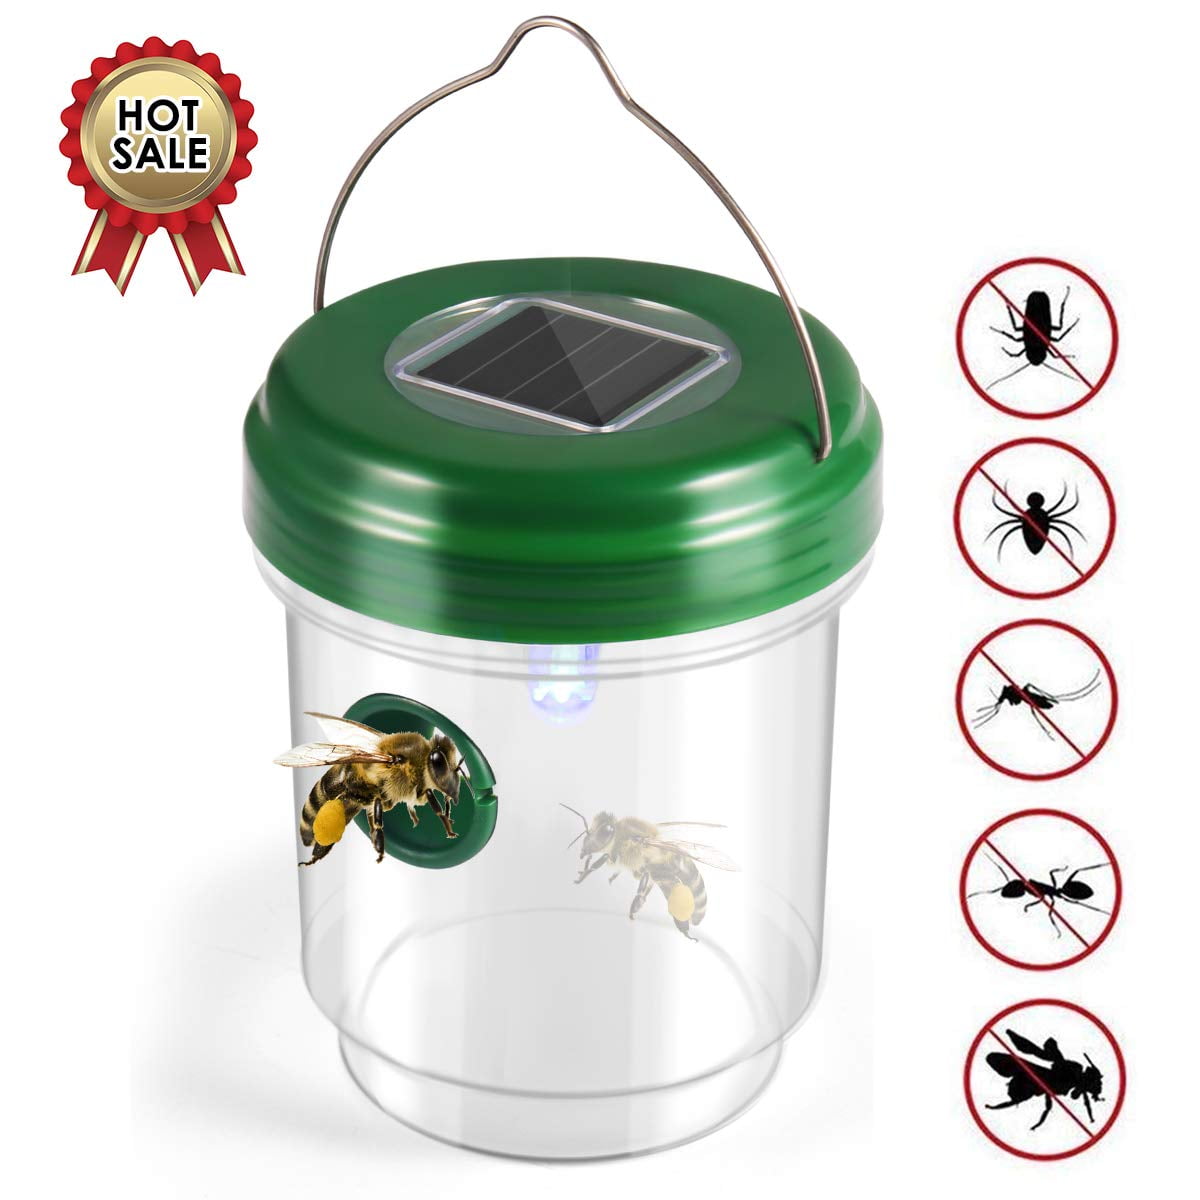 Insect-Fly Trap Bag Catcher Killer-Bug Wasp Flies Pest-Control Insects Trapper 